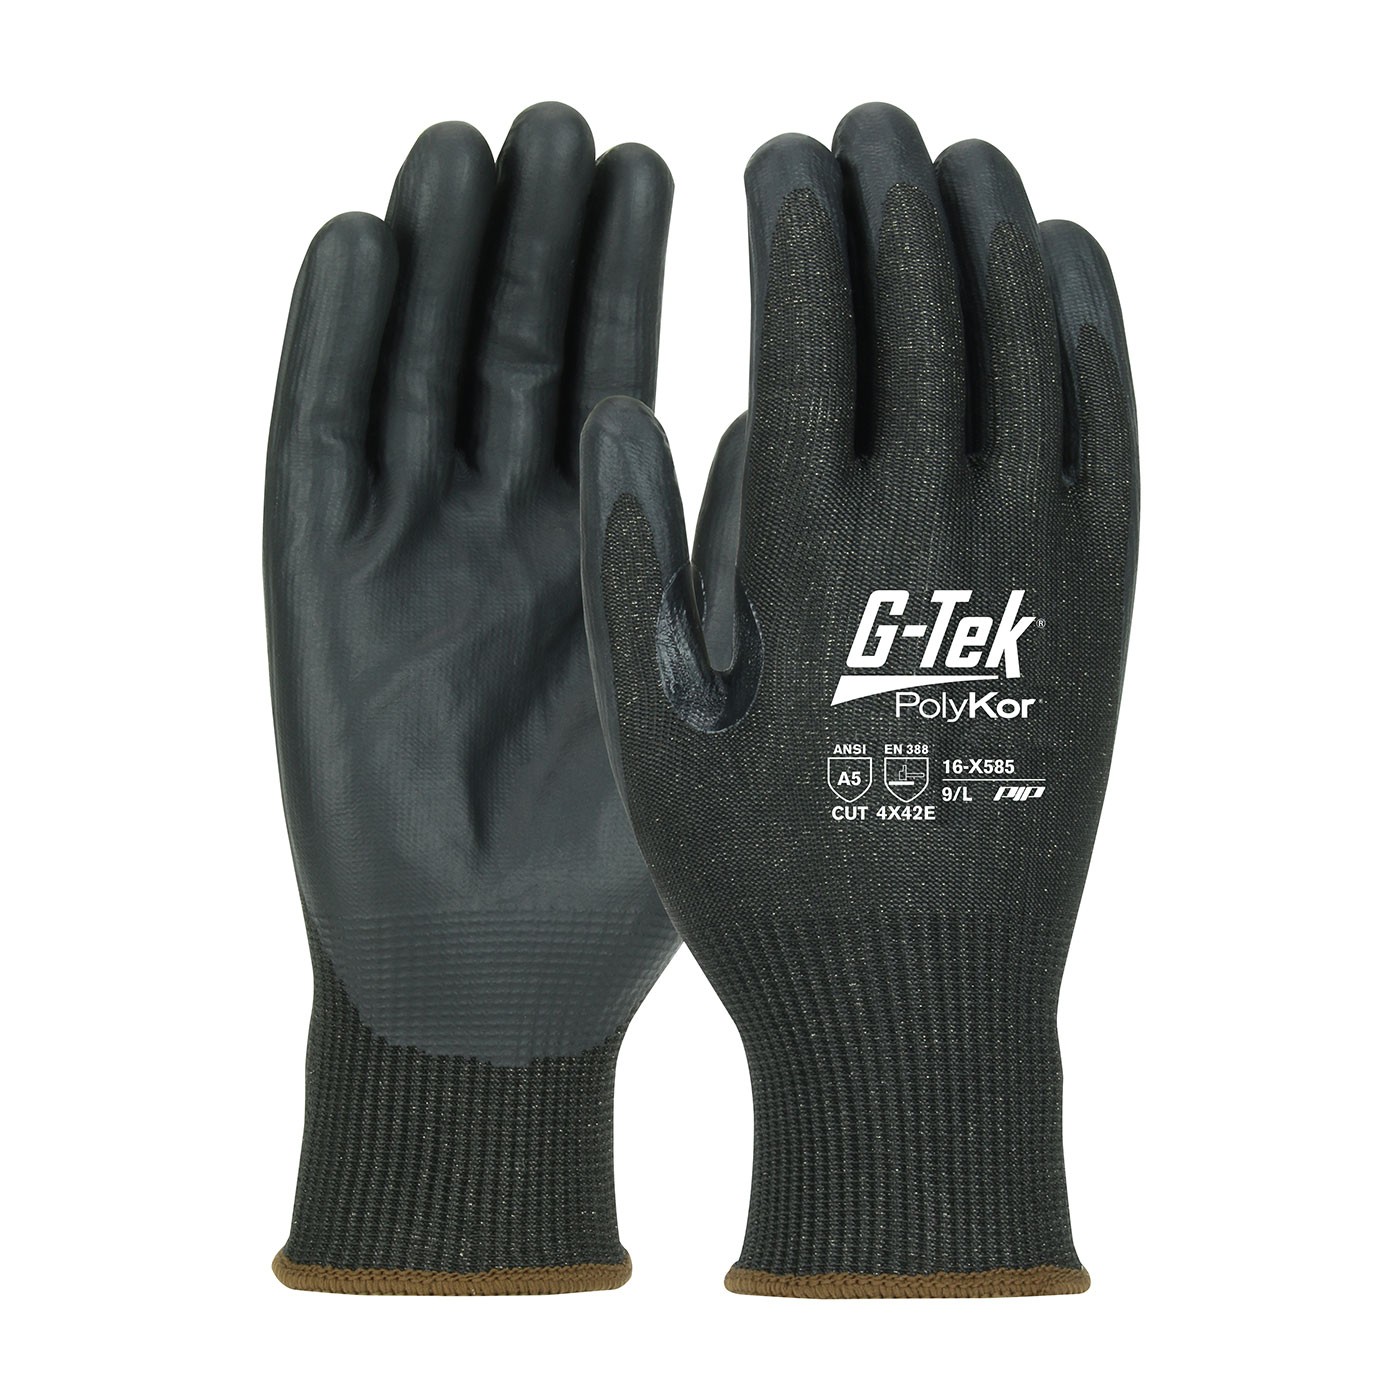 G-Tek® PolyKor® Xrystal® Seamless Knit PolyKor® Xrystal® Blended Glove with NeoFoam® Coated Palm & Fingers - Touchscreen Compatible  (#16-X585)